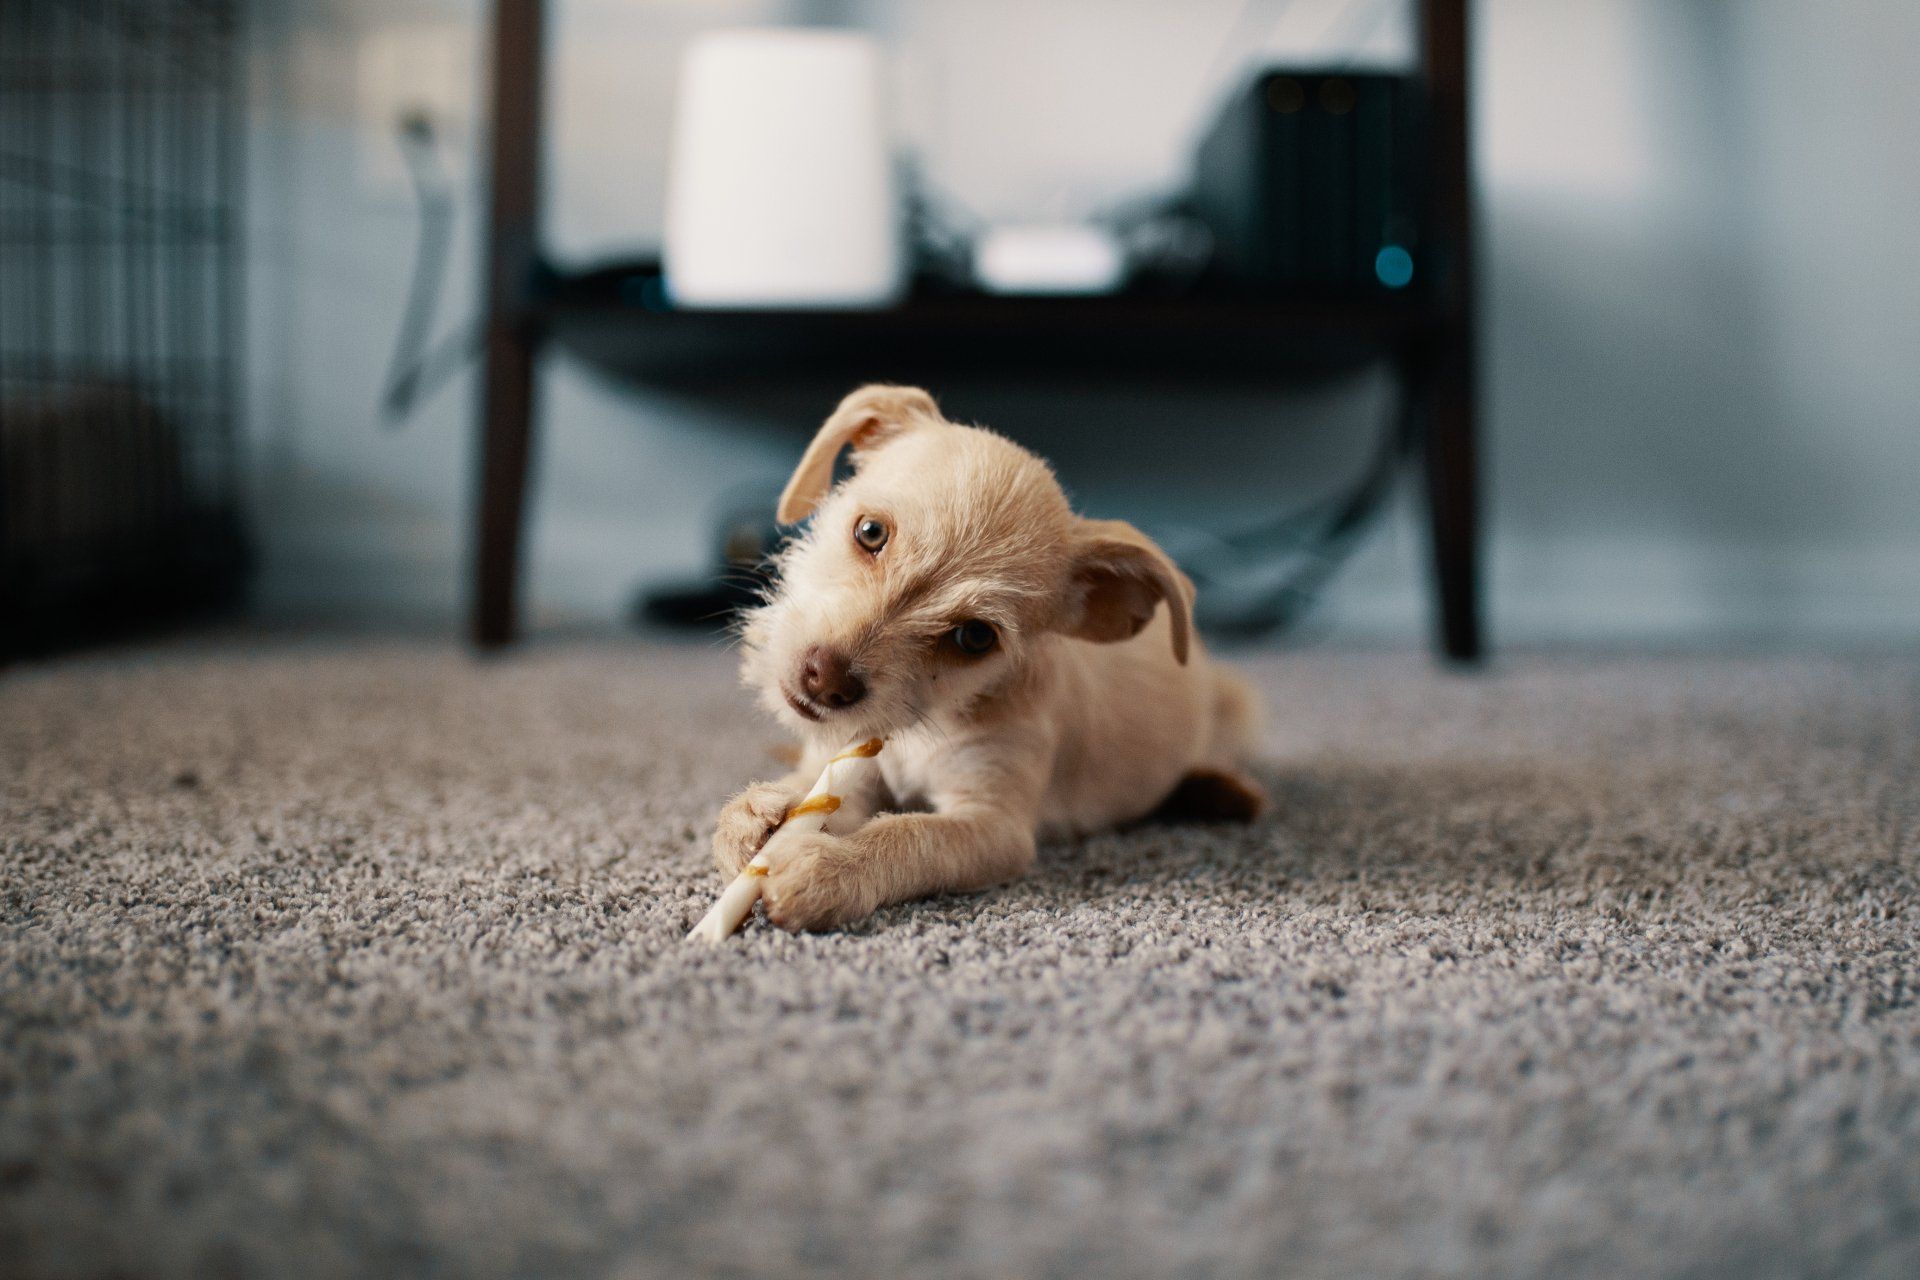 An adorable dog comfortably lounging on a freshly cleaned and treated carpet, enjoying the softness and cleanliness.